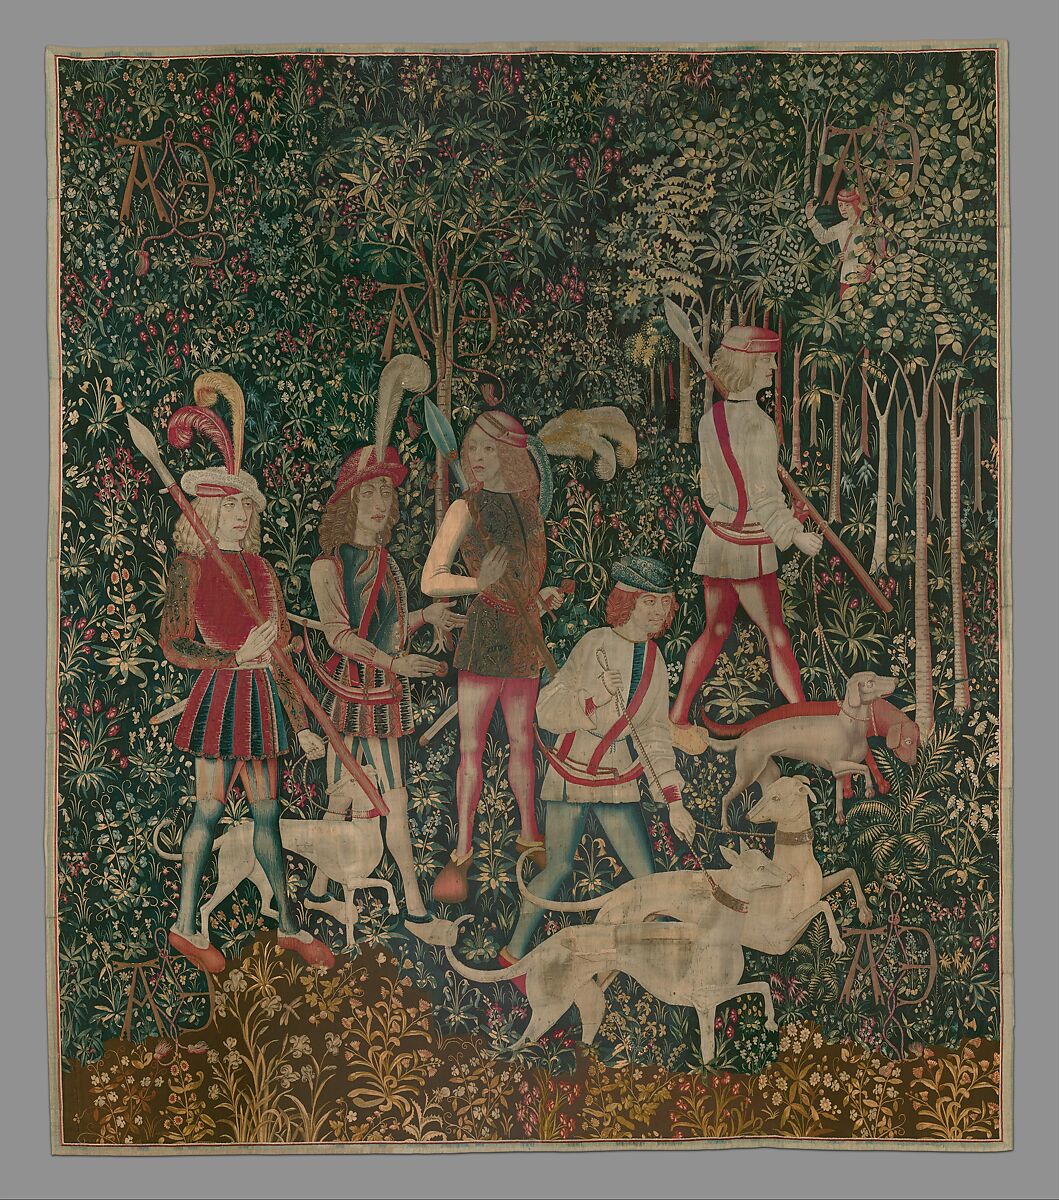 The Hunters Enter the Woods (from the Unicorn Tapestries), Wool warp, wool, silk, silver, and gilt wefts, French (cartoon)/South Netherlandish (woven)